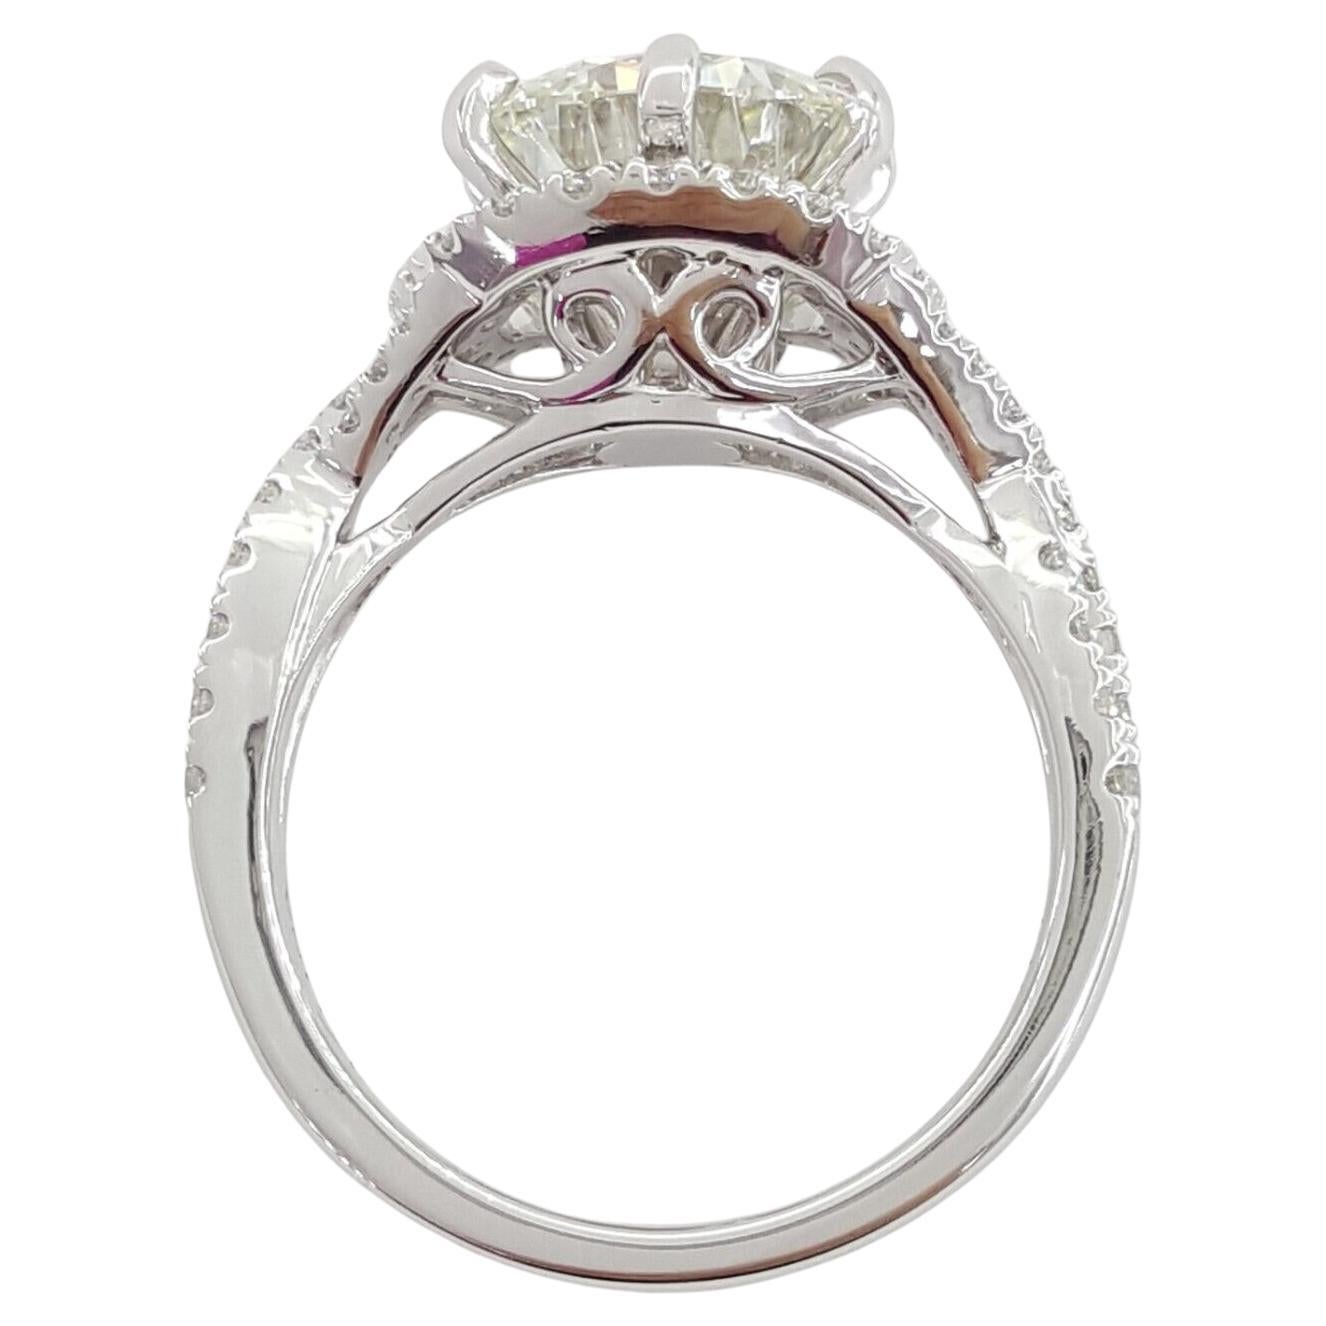 Presenting an extraordinary symbol of love and devotion: the 3.62 ct Total Weight Round Brilliant Cut Diamond Crossover Halo Engagement Ring, elegantly crafted in 14K White Gold.

Weighing a total of 6 grams and sized at 6.5, this ring is adorned